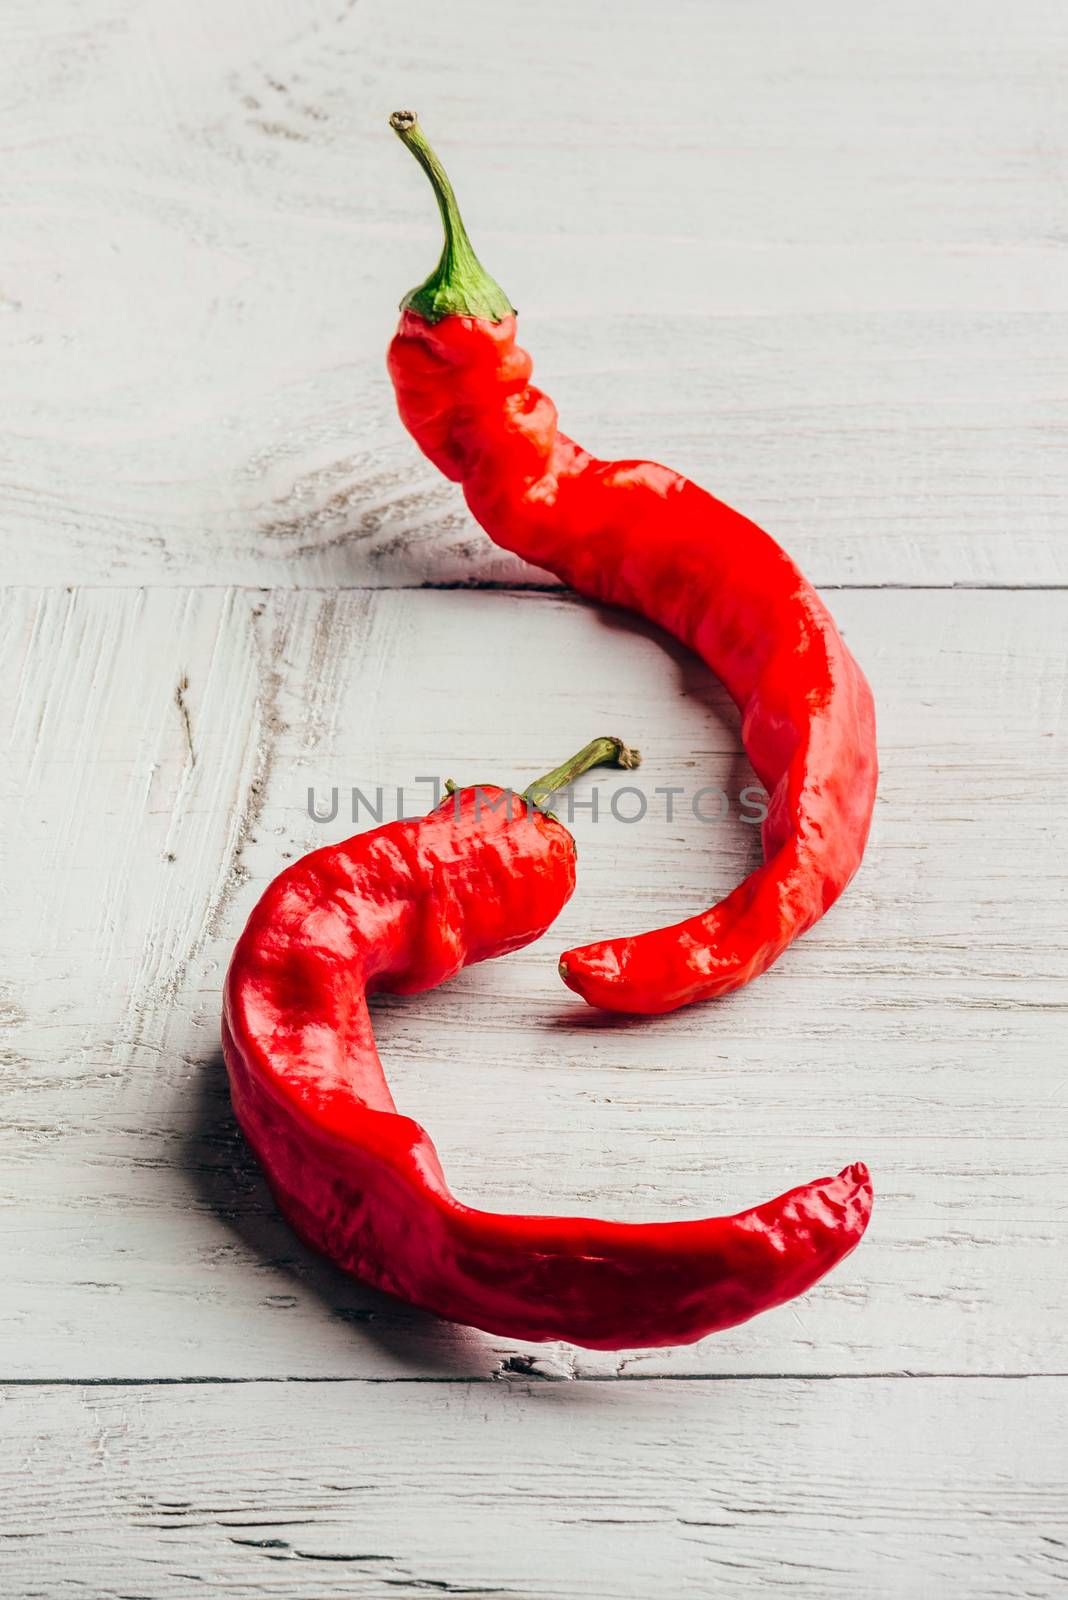 Two chili peppers on white background. by Seva_blsv